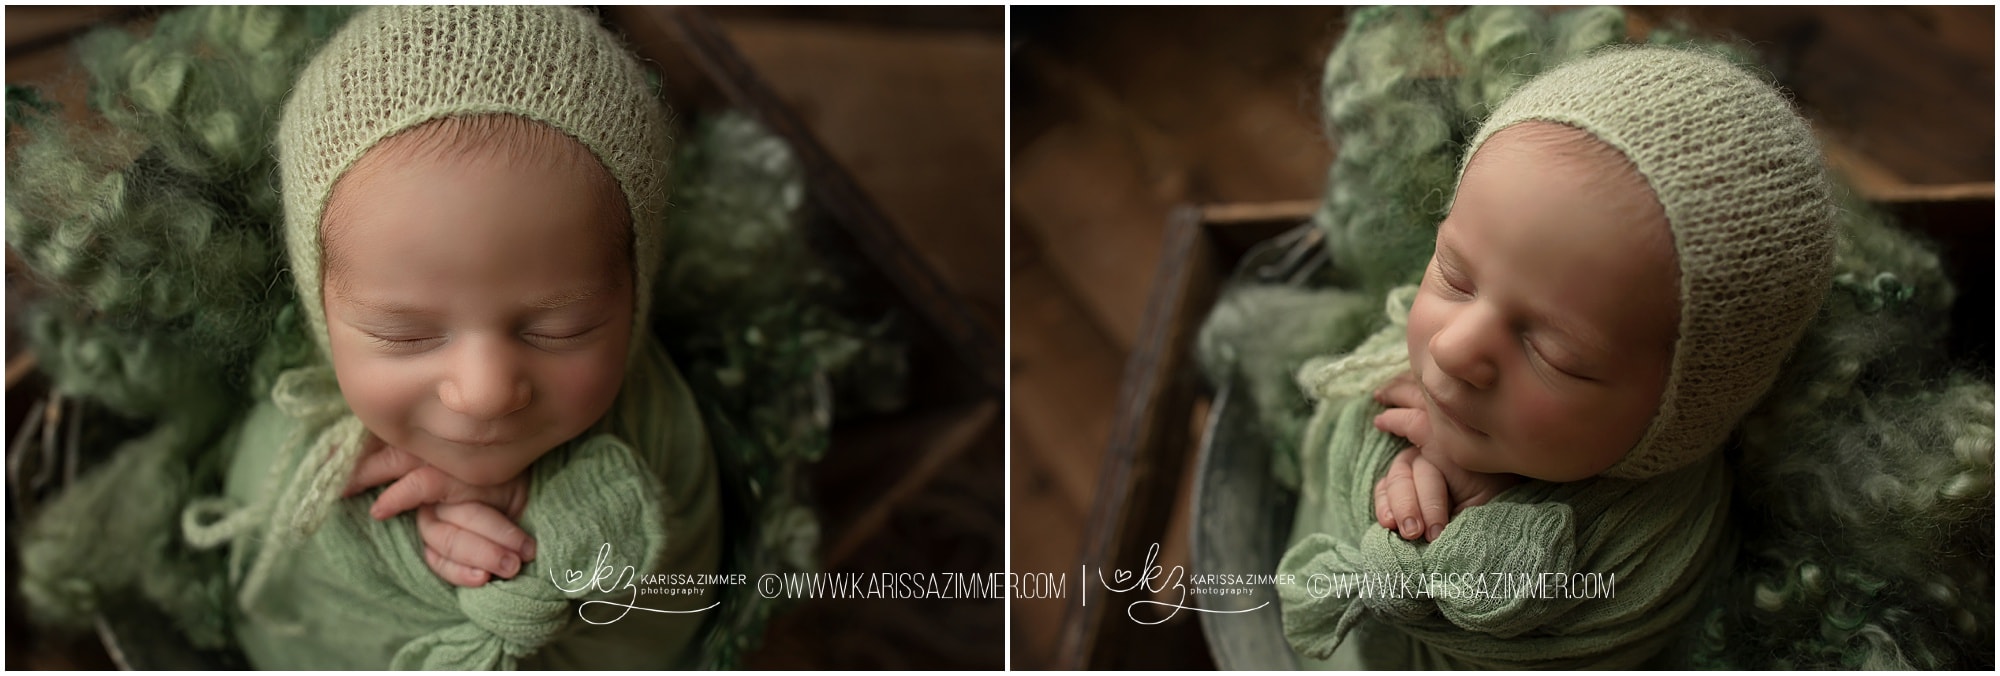 baby boy posed in green for newborn photography shoot